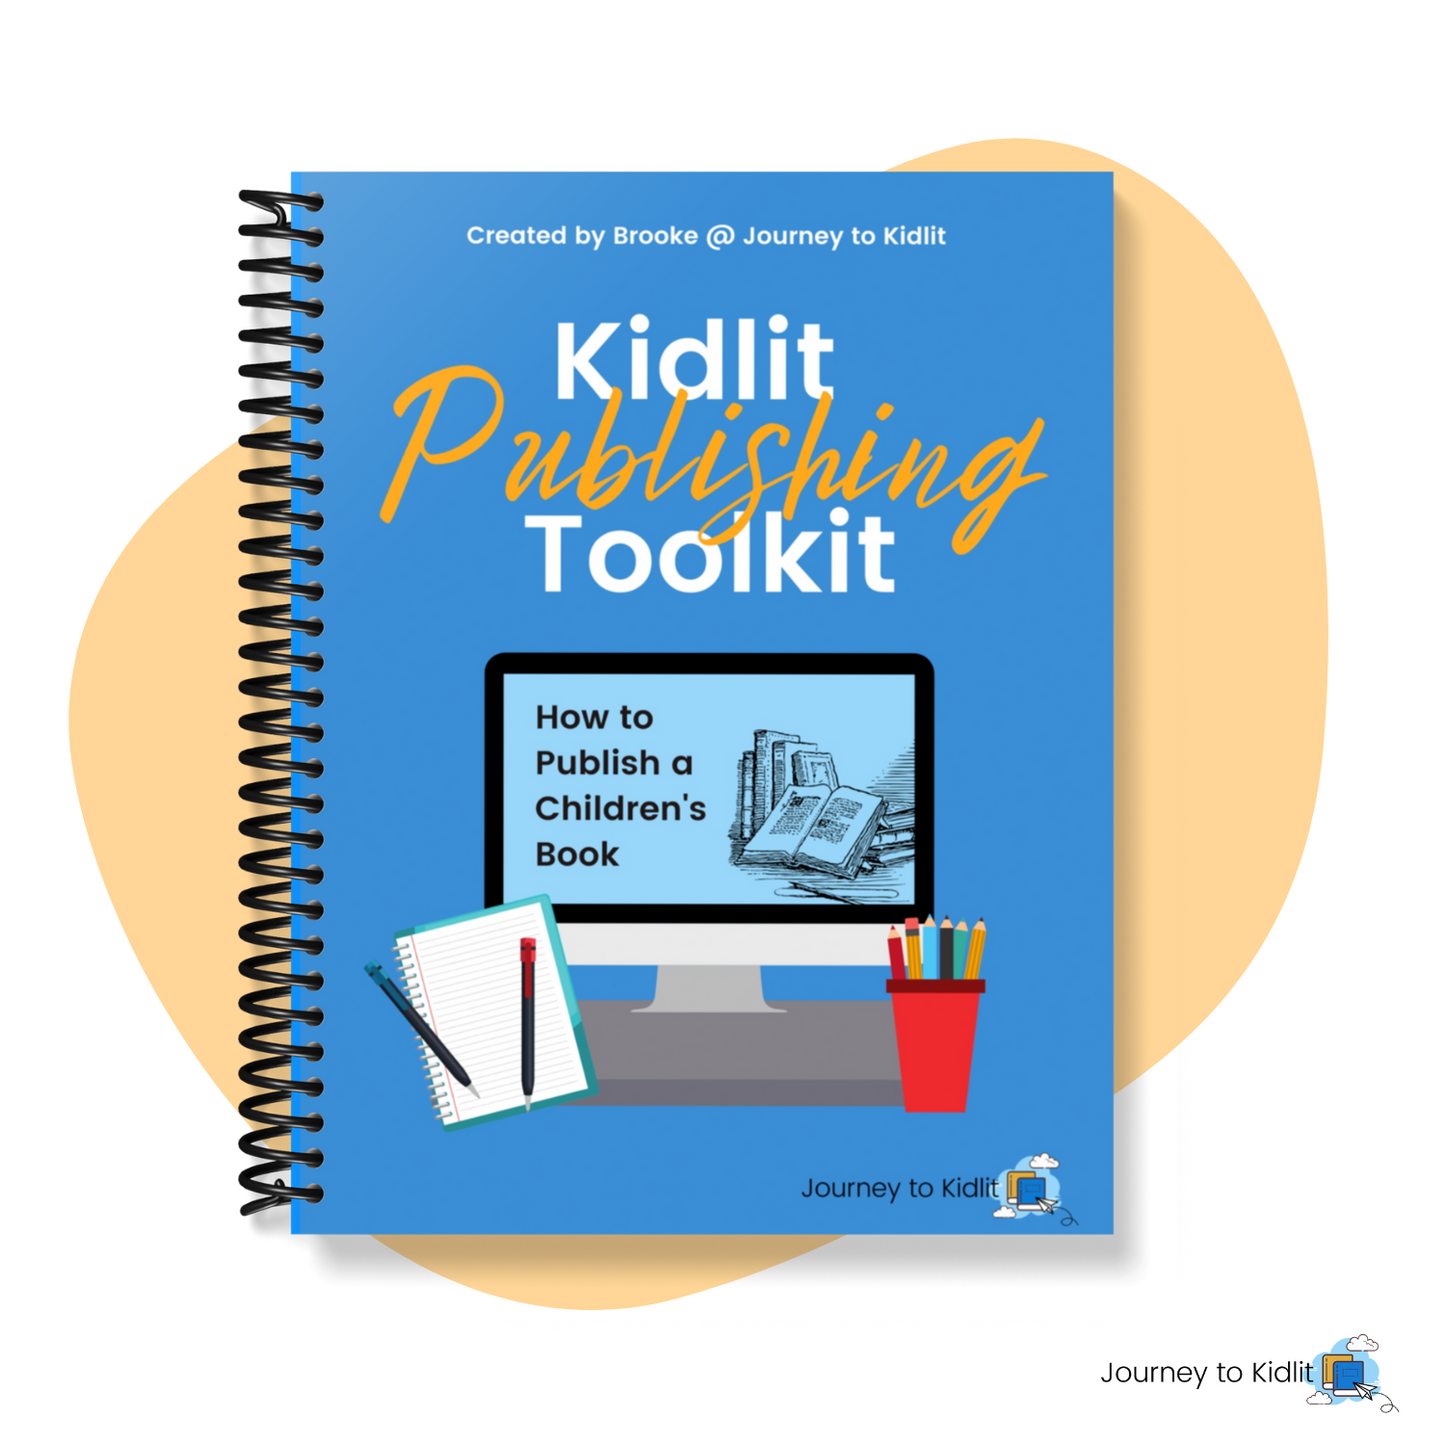 Kidlit Publishing Toolkit - How to publish a children's book.